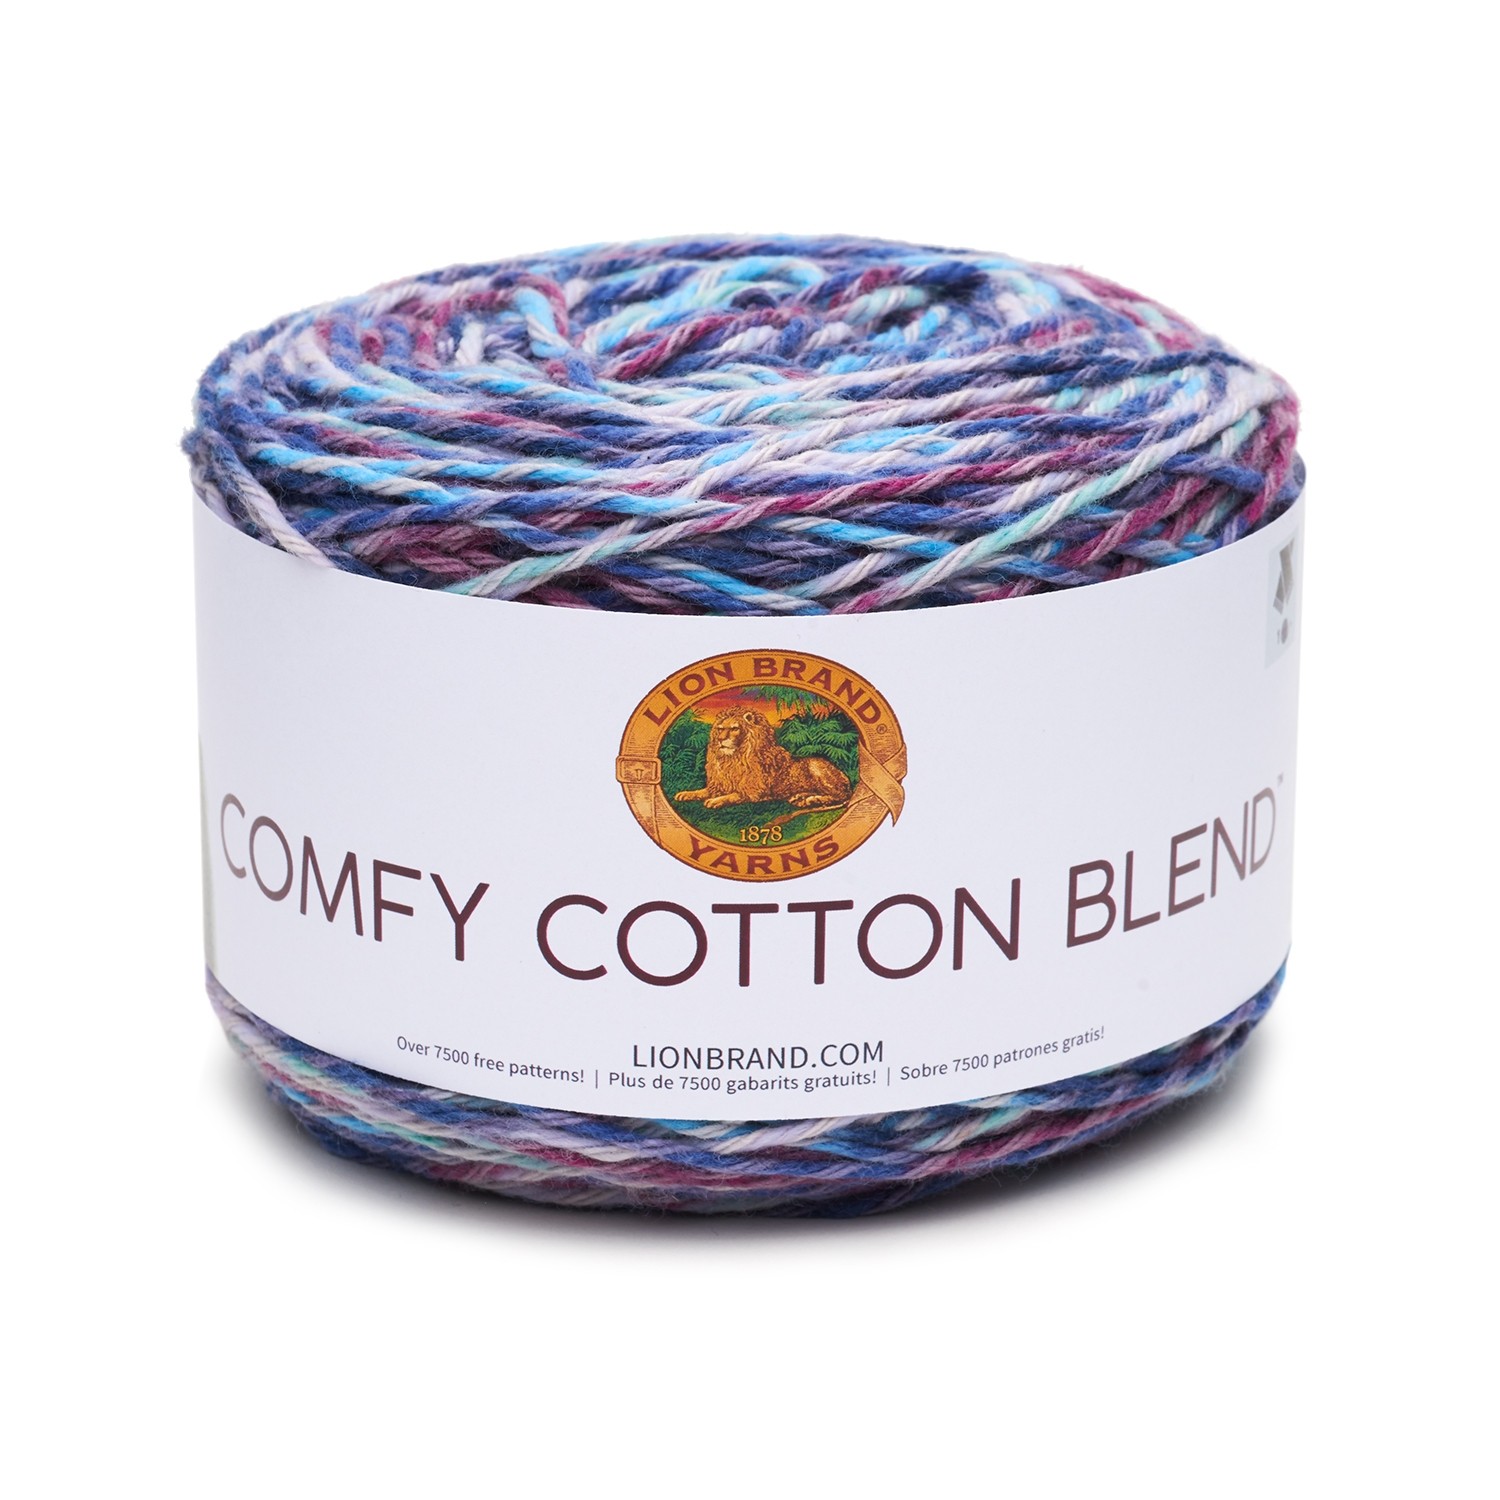 Flikka v. Comfy Cotton: What's the Difference?